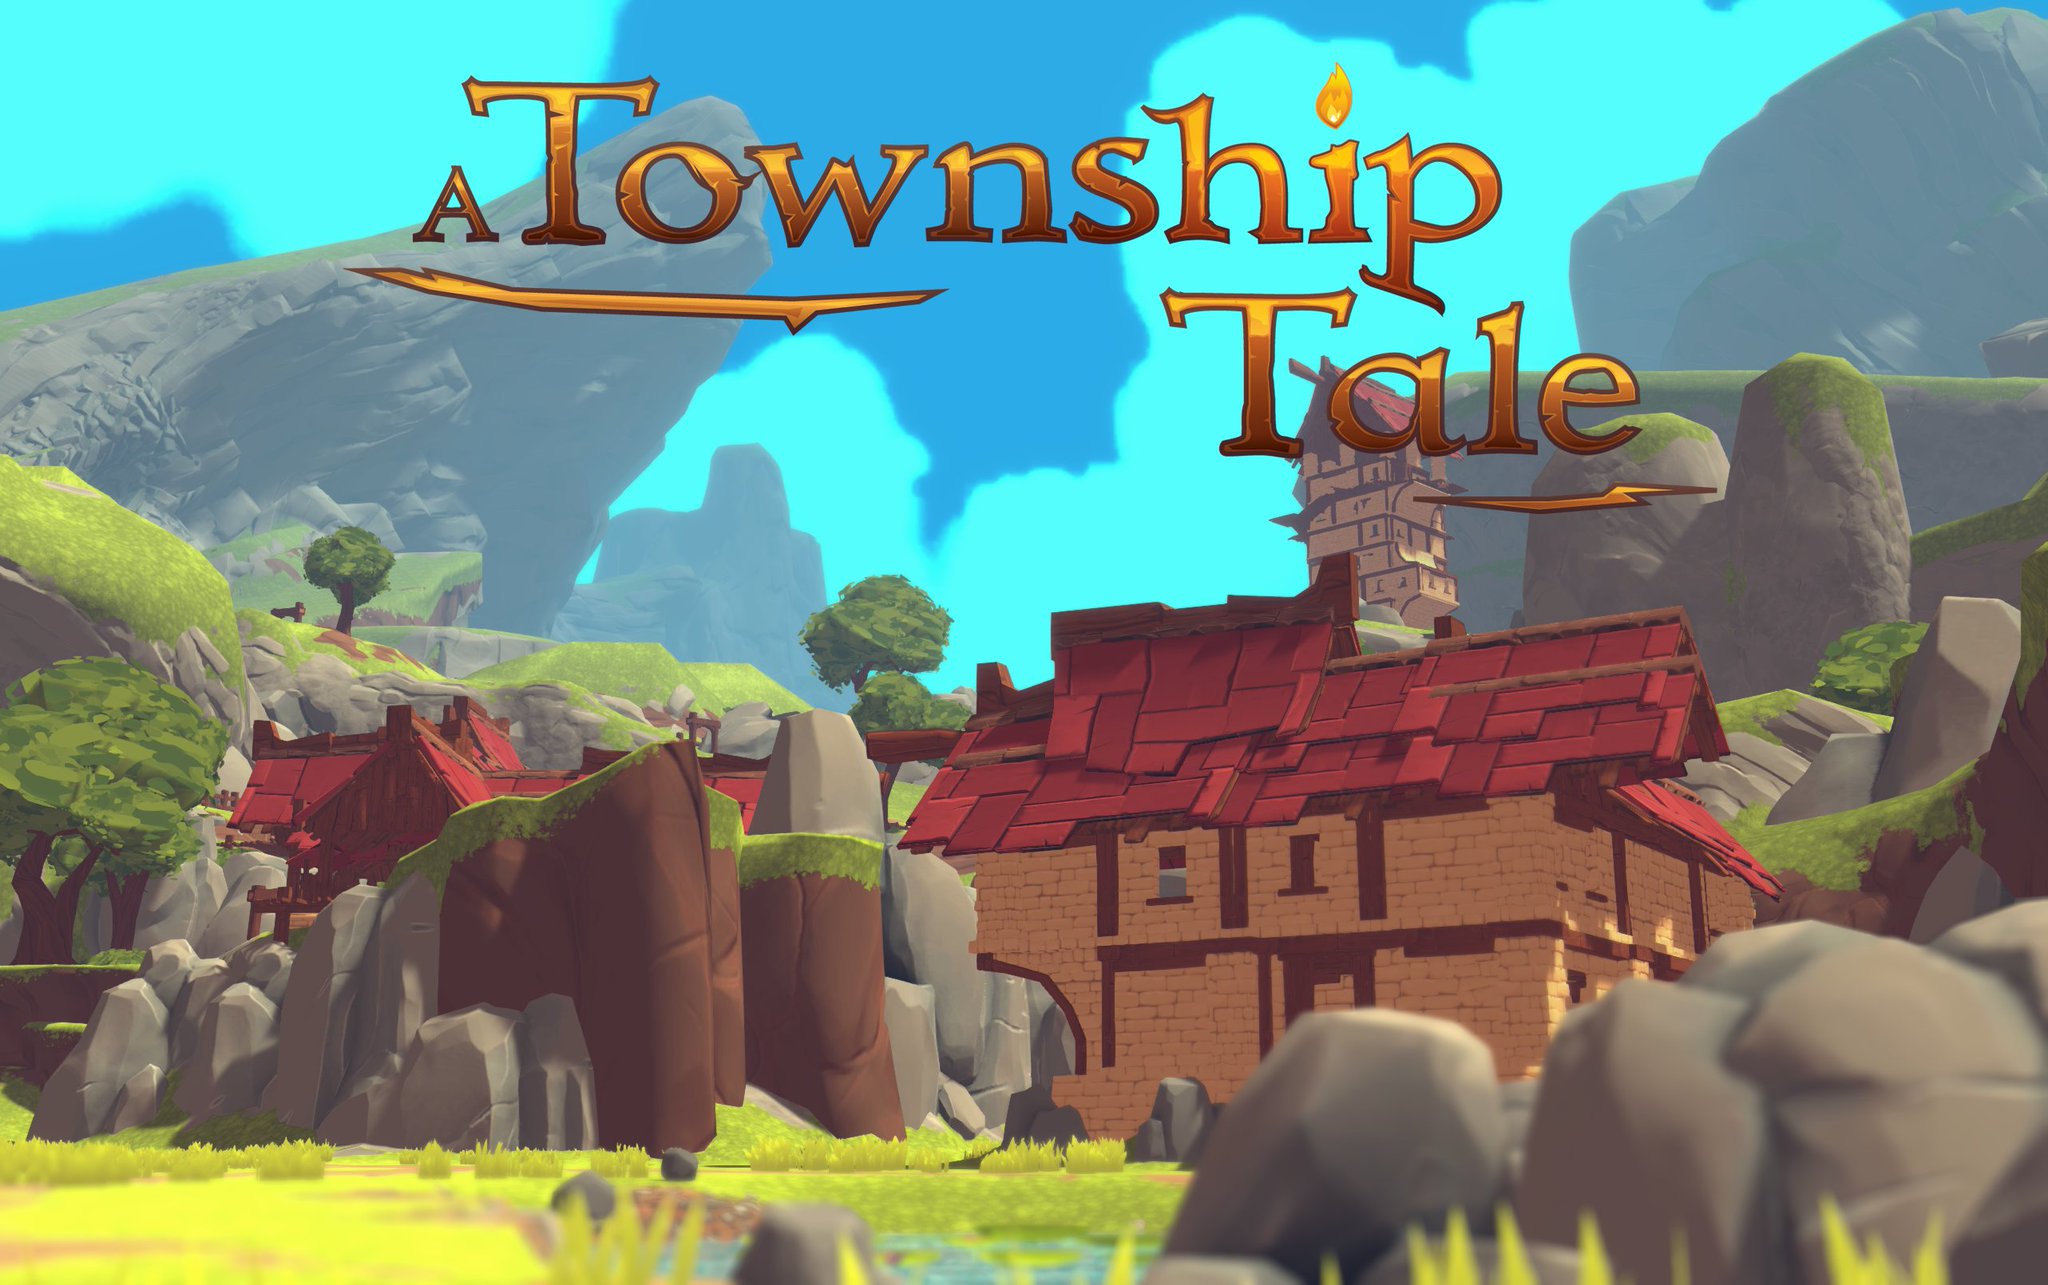 Games - [WIP][VR] Township - Unity Forum